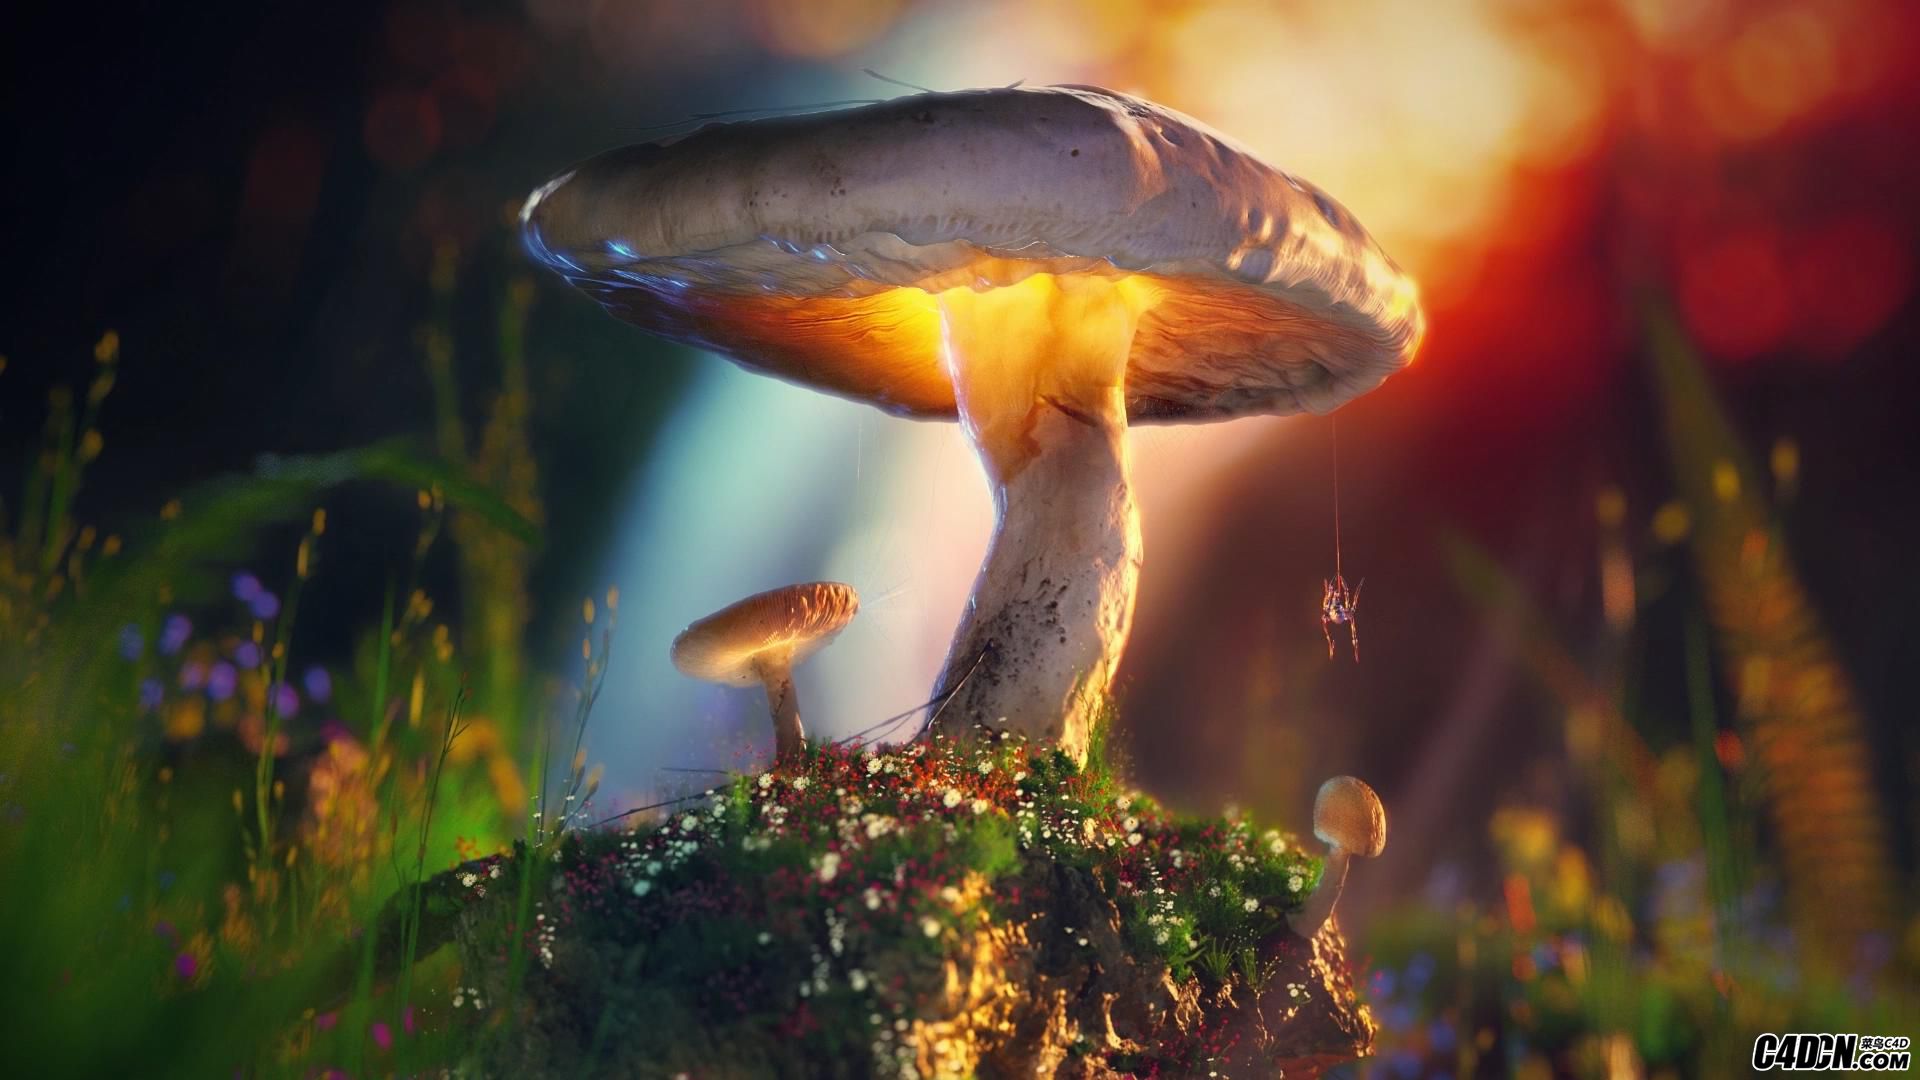 How to create scenes using Megascans with Octane and Cinema 4D -C4DSKY_20170917151052.JPG